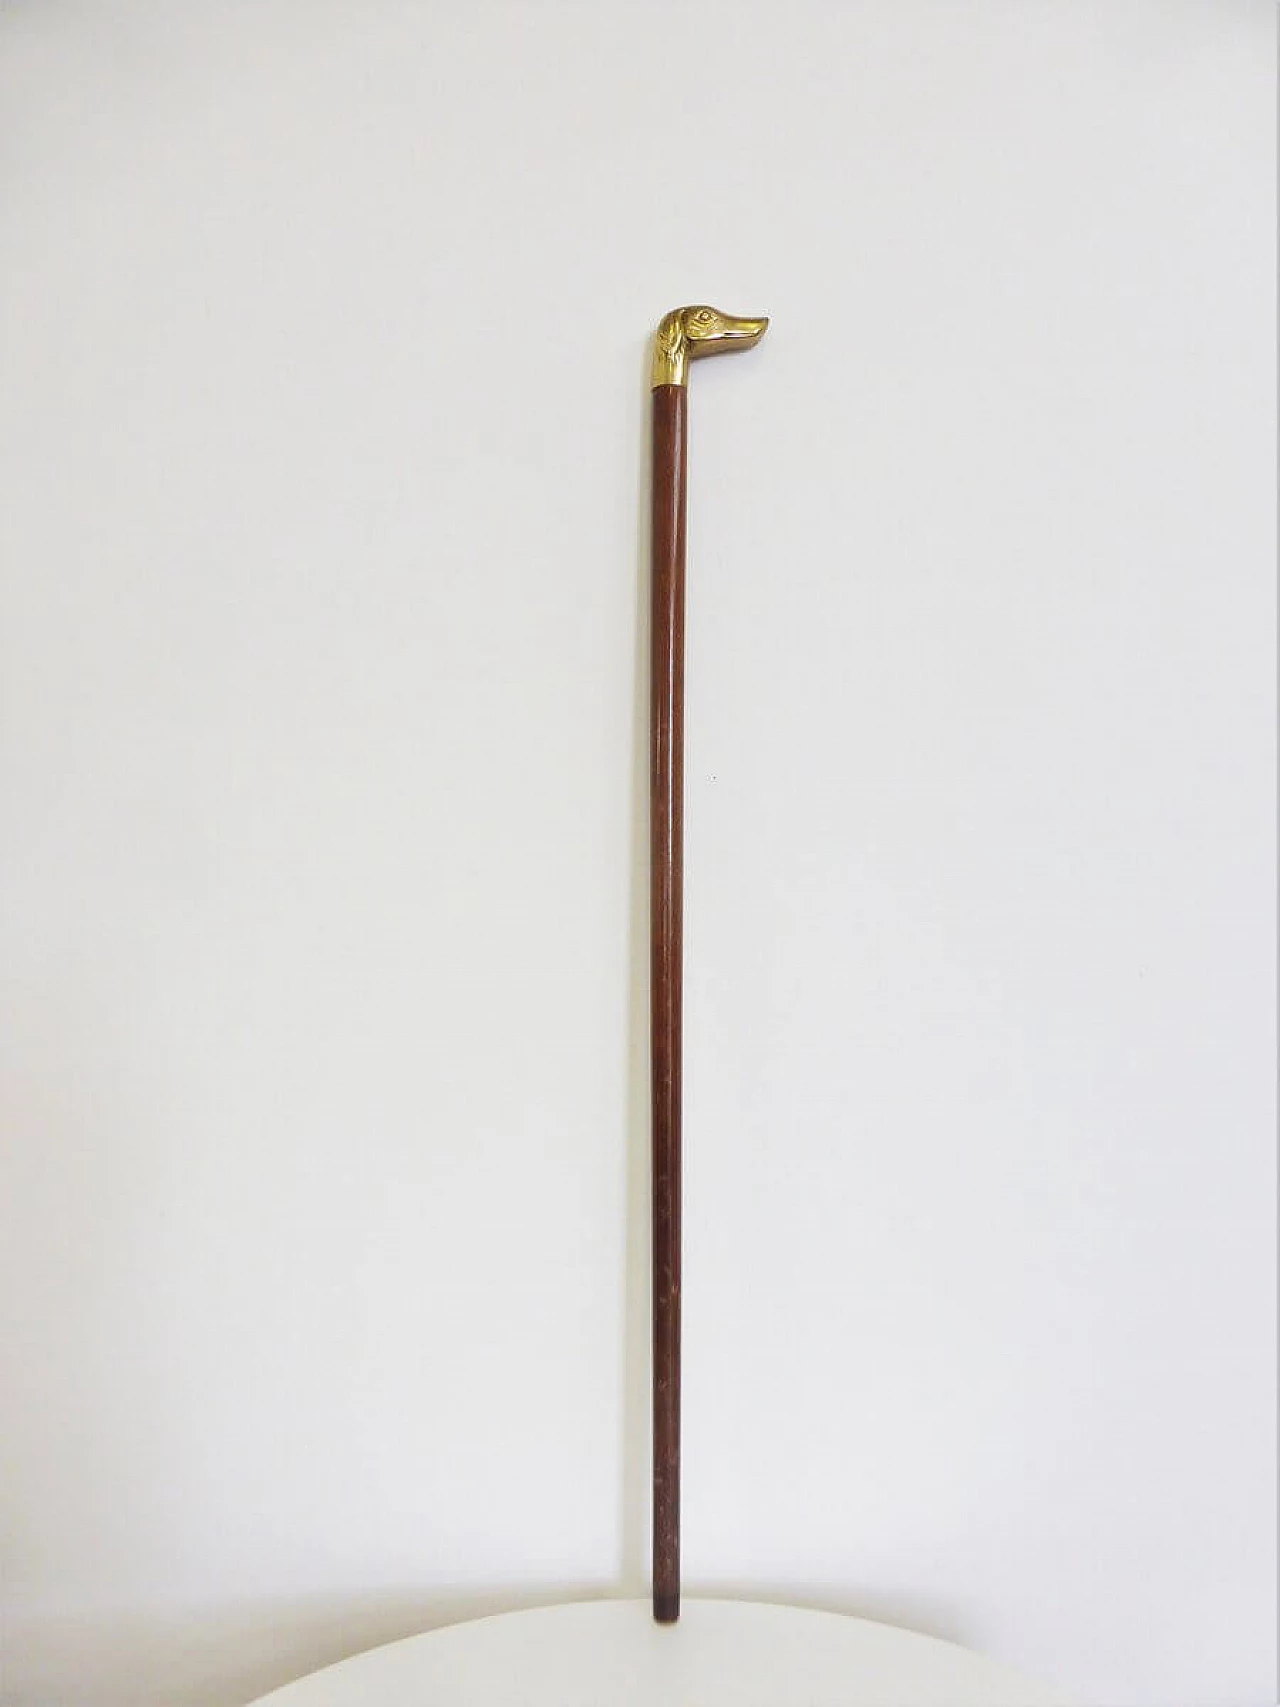 Walking stick with brass handle, 1950s 1376546